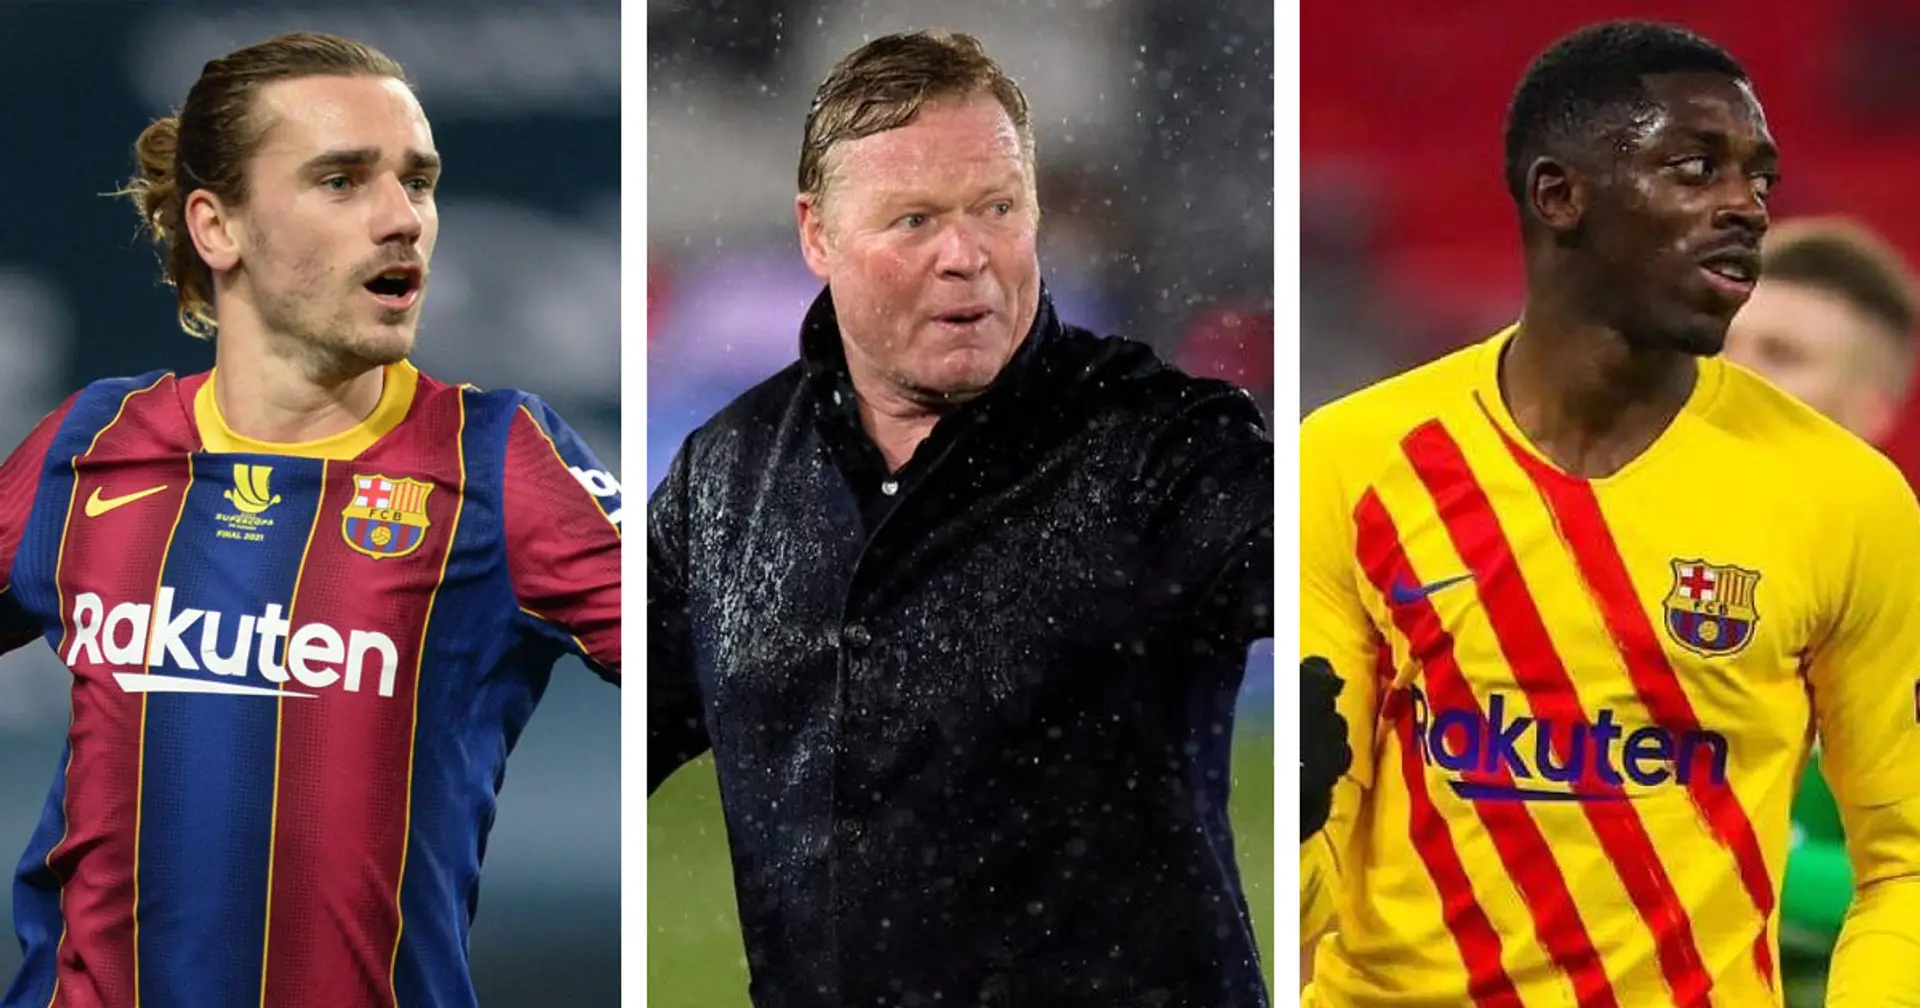 Koeman to continue with 3-5-2 set-up despite Clasico disappointment, Dembele or Griezmann to be benched